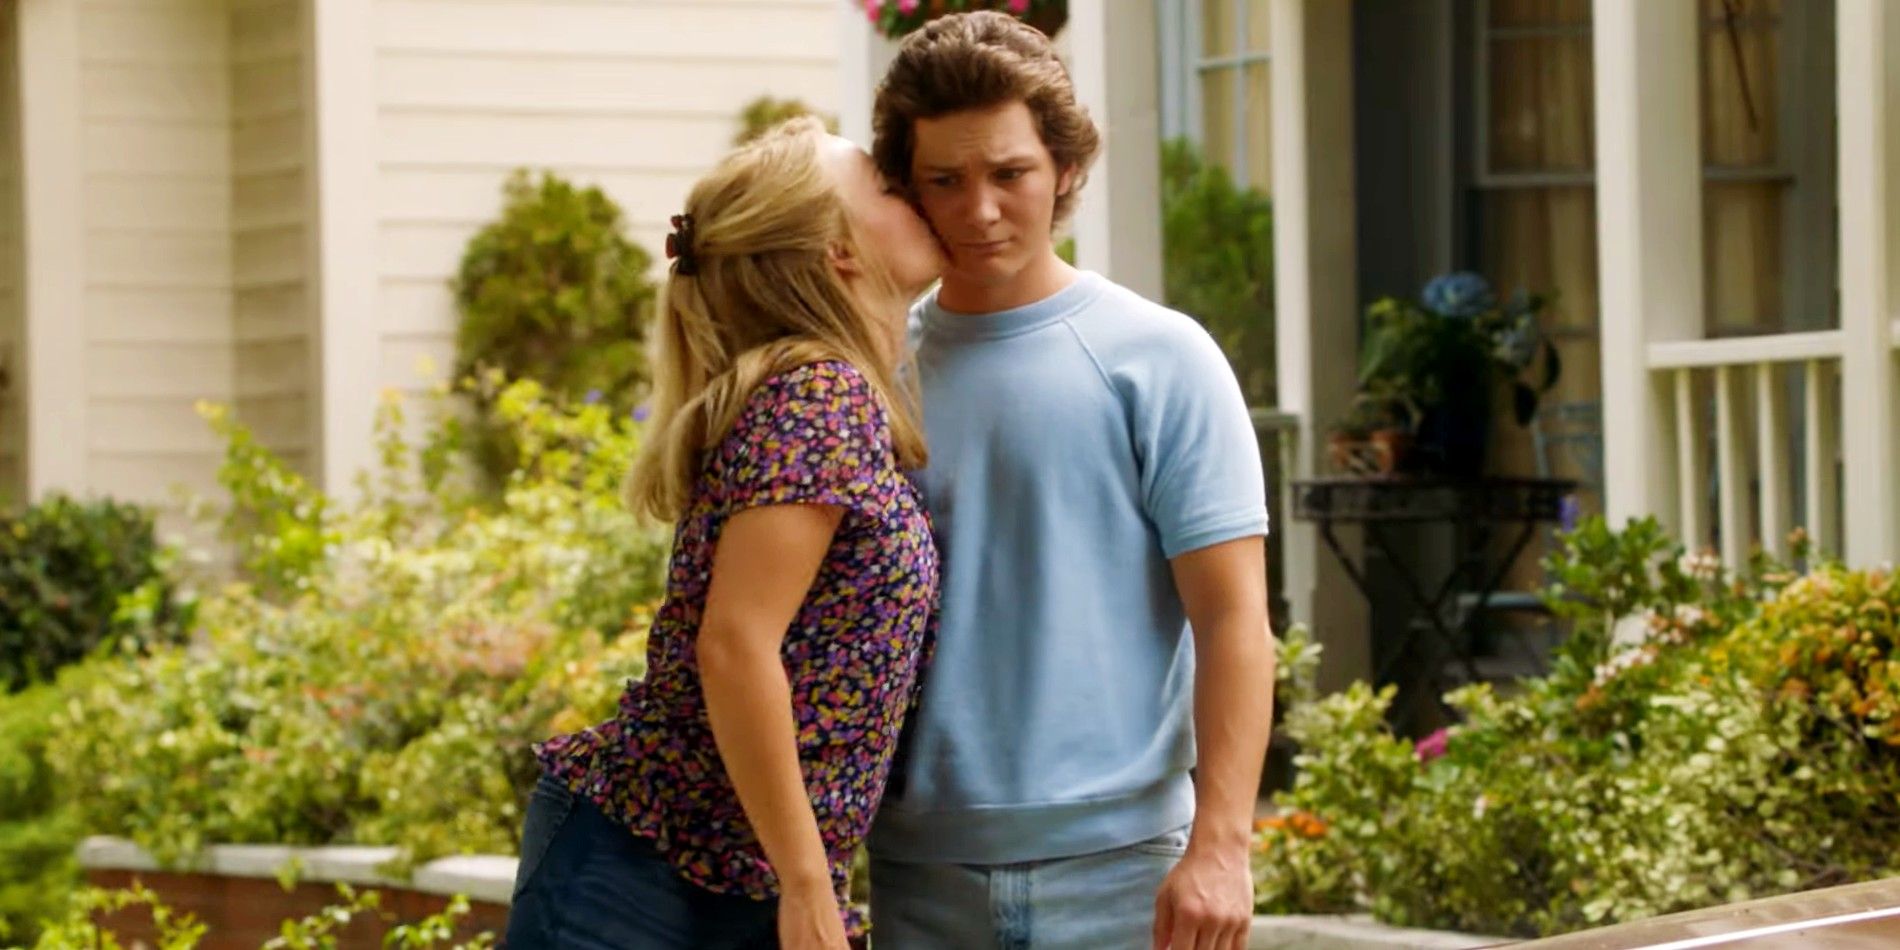 Mandy kisses Georgie's cheek while at their front lawn in Georgie & Mandy's First Marriage trailer